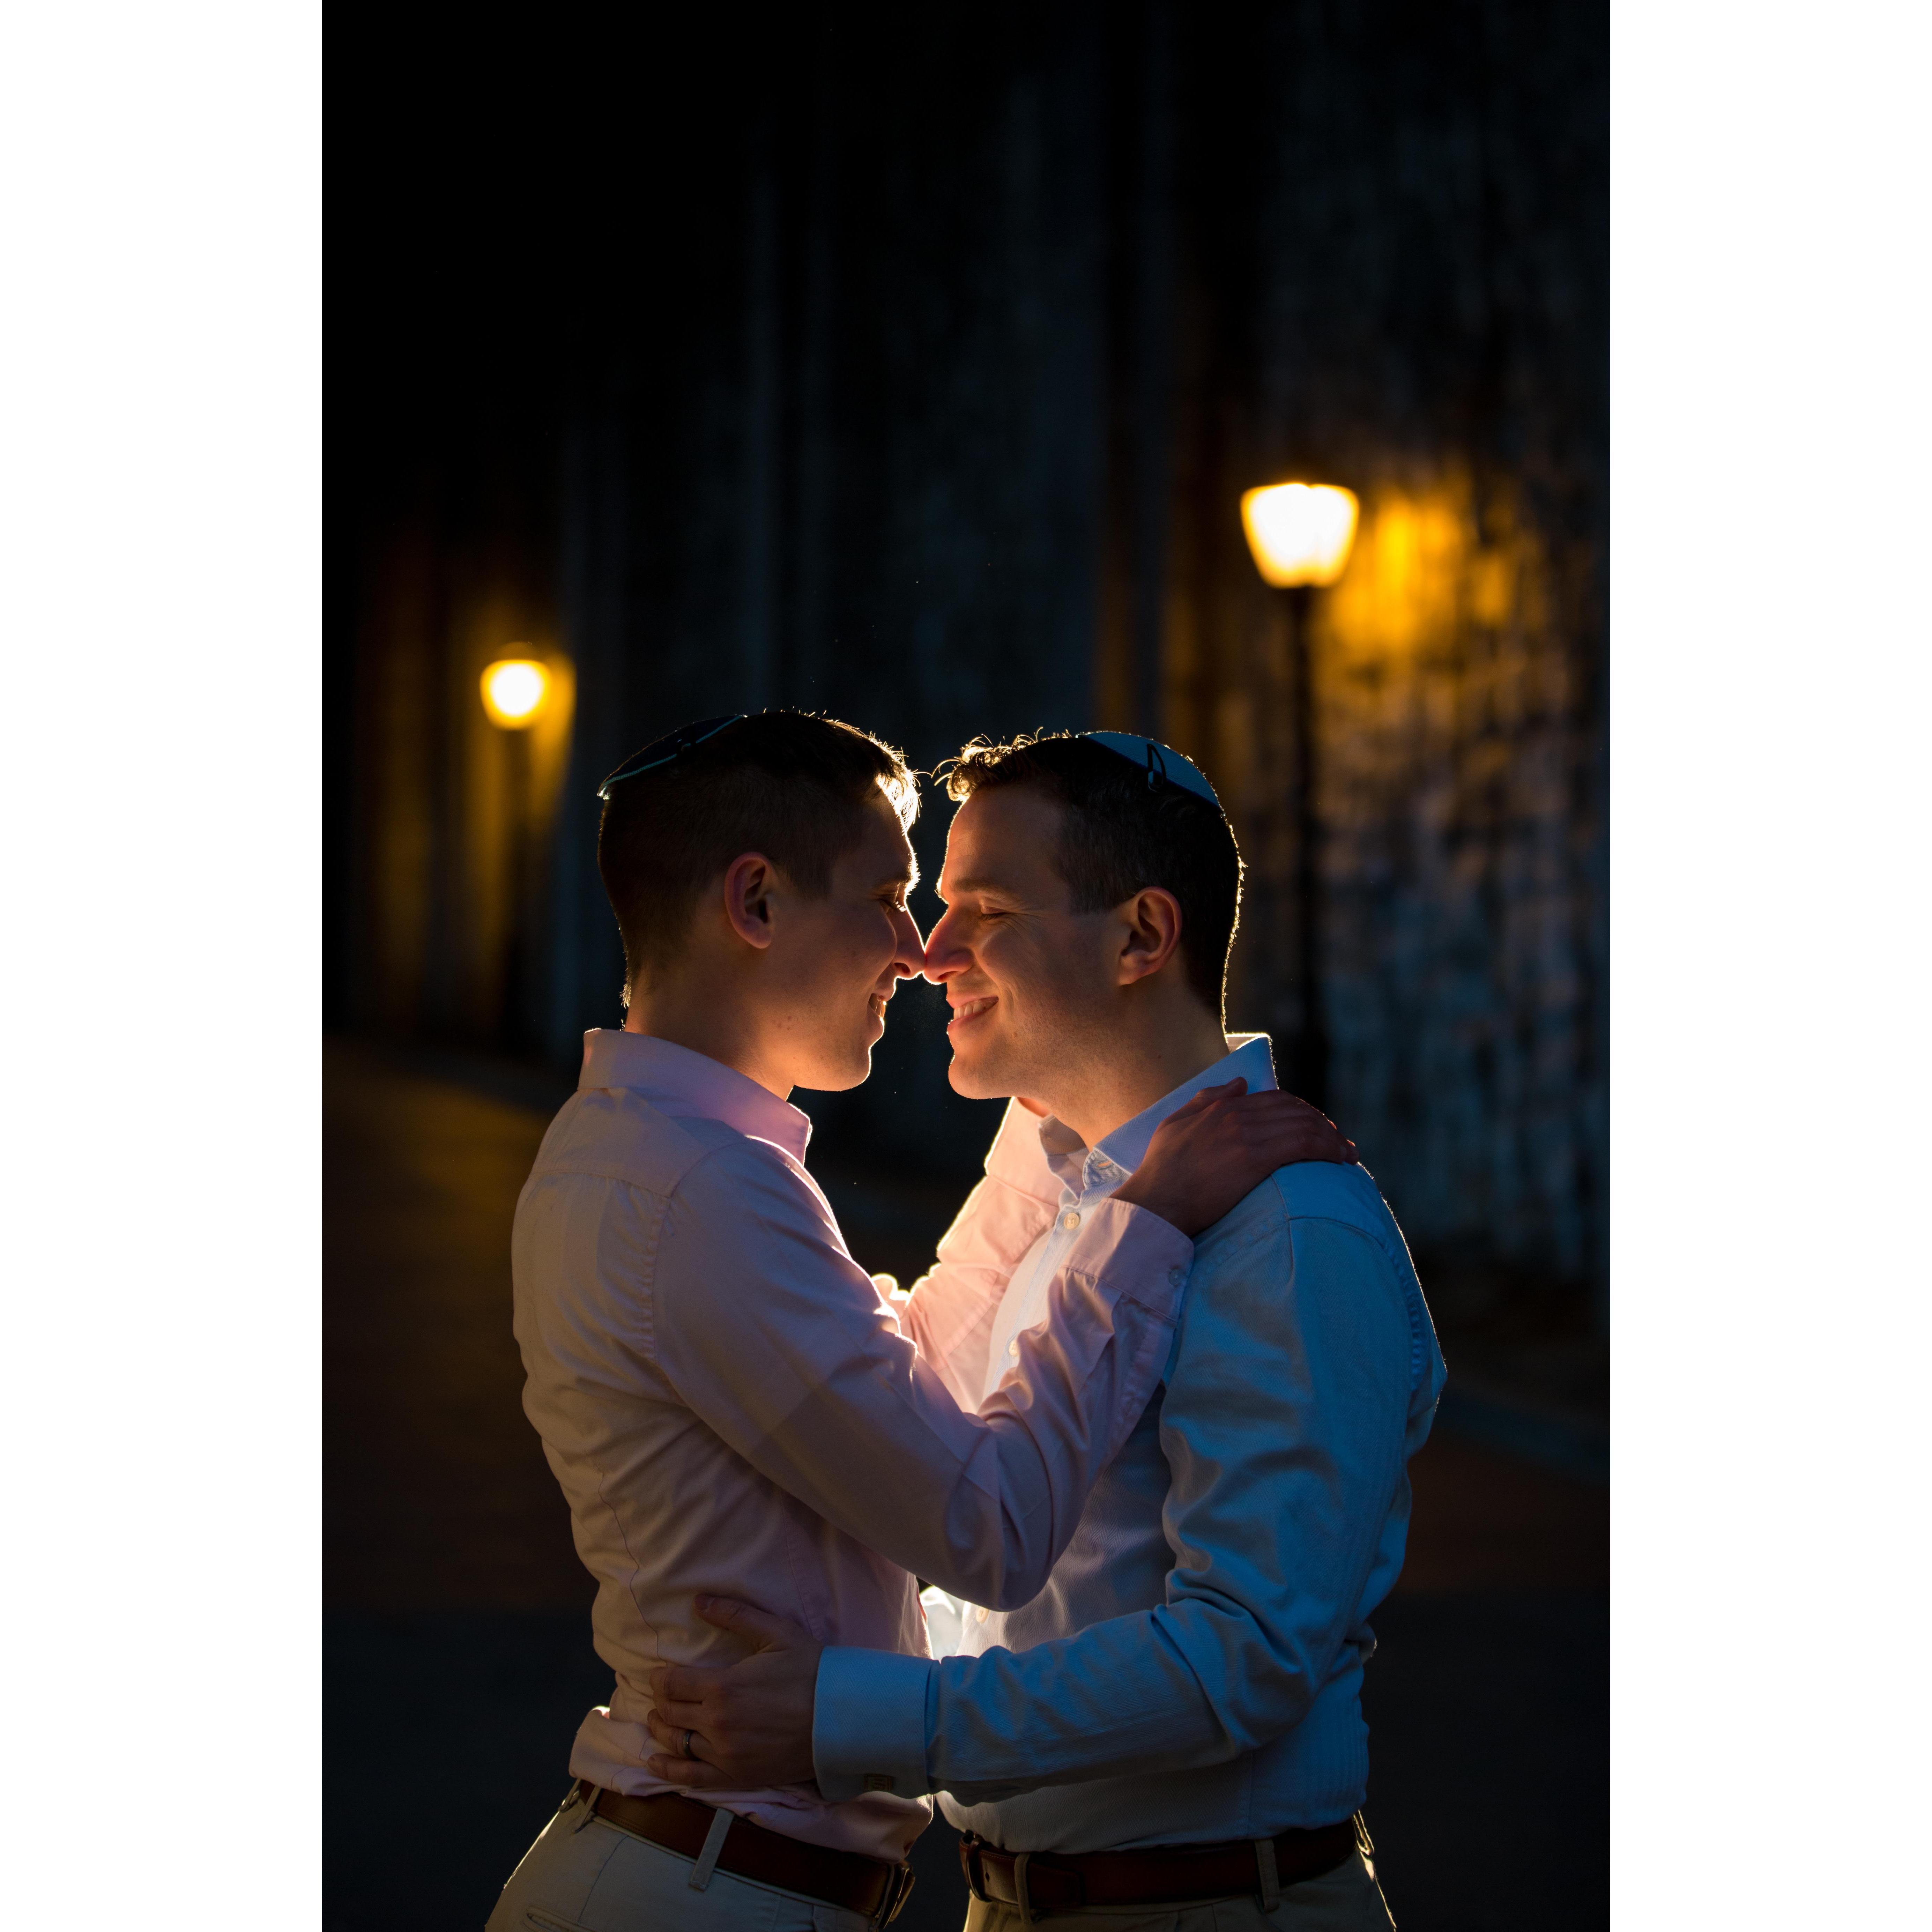 From our Engagement Shoot!!!

Thank you David Perlman Photography